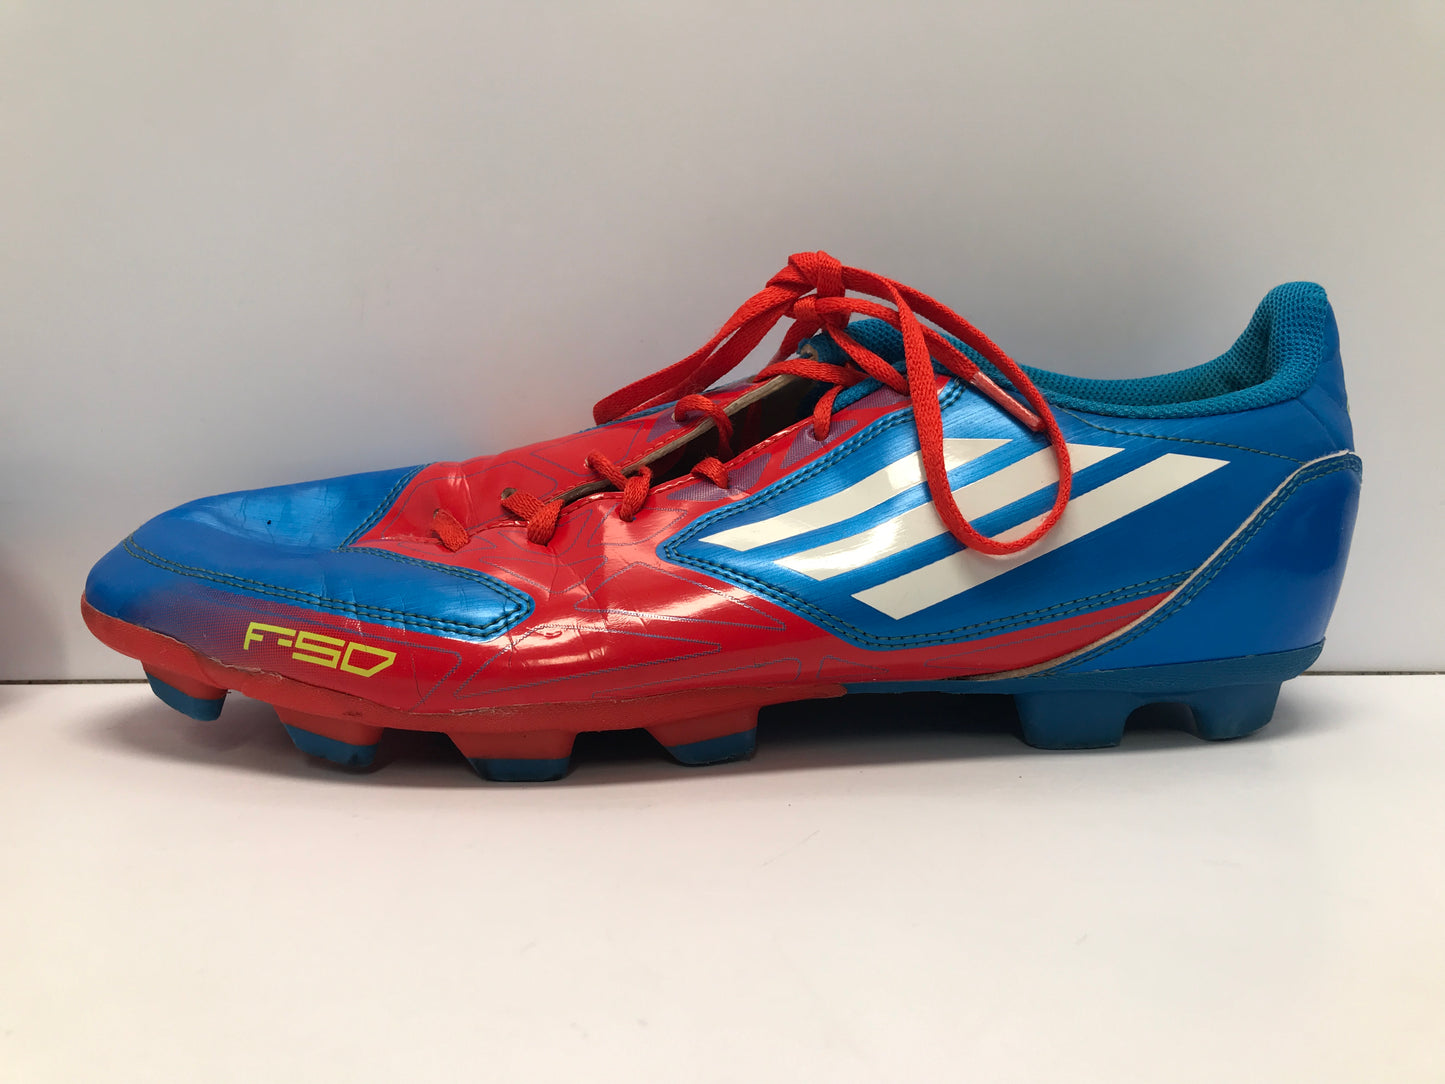 Soccer Shoes Cleats Men's Size 11.5 Adidas Blue Red